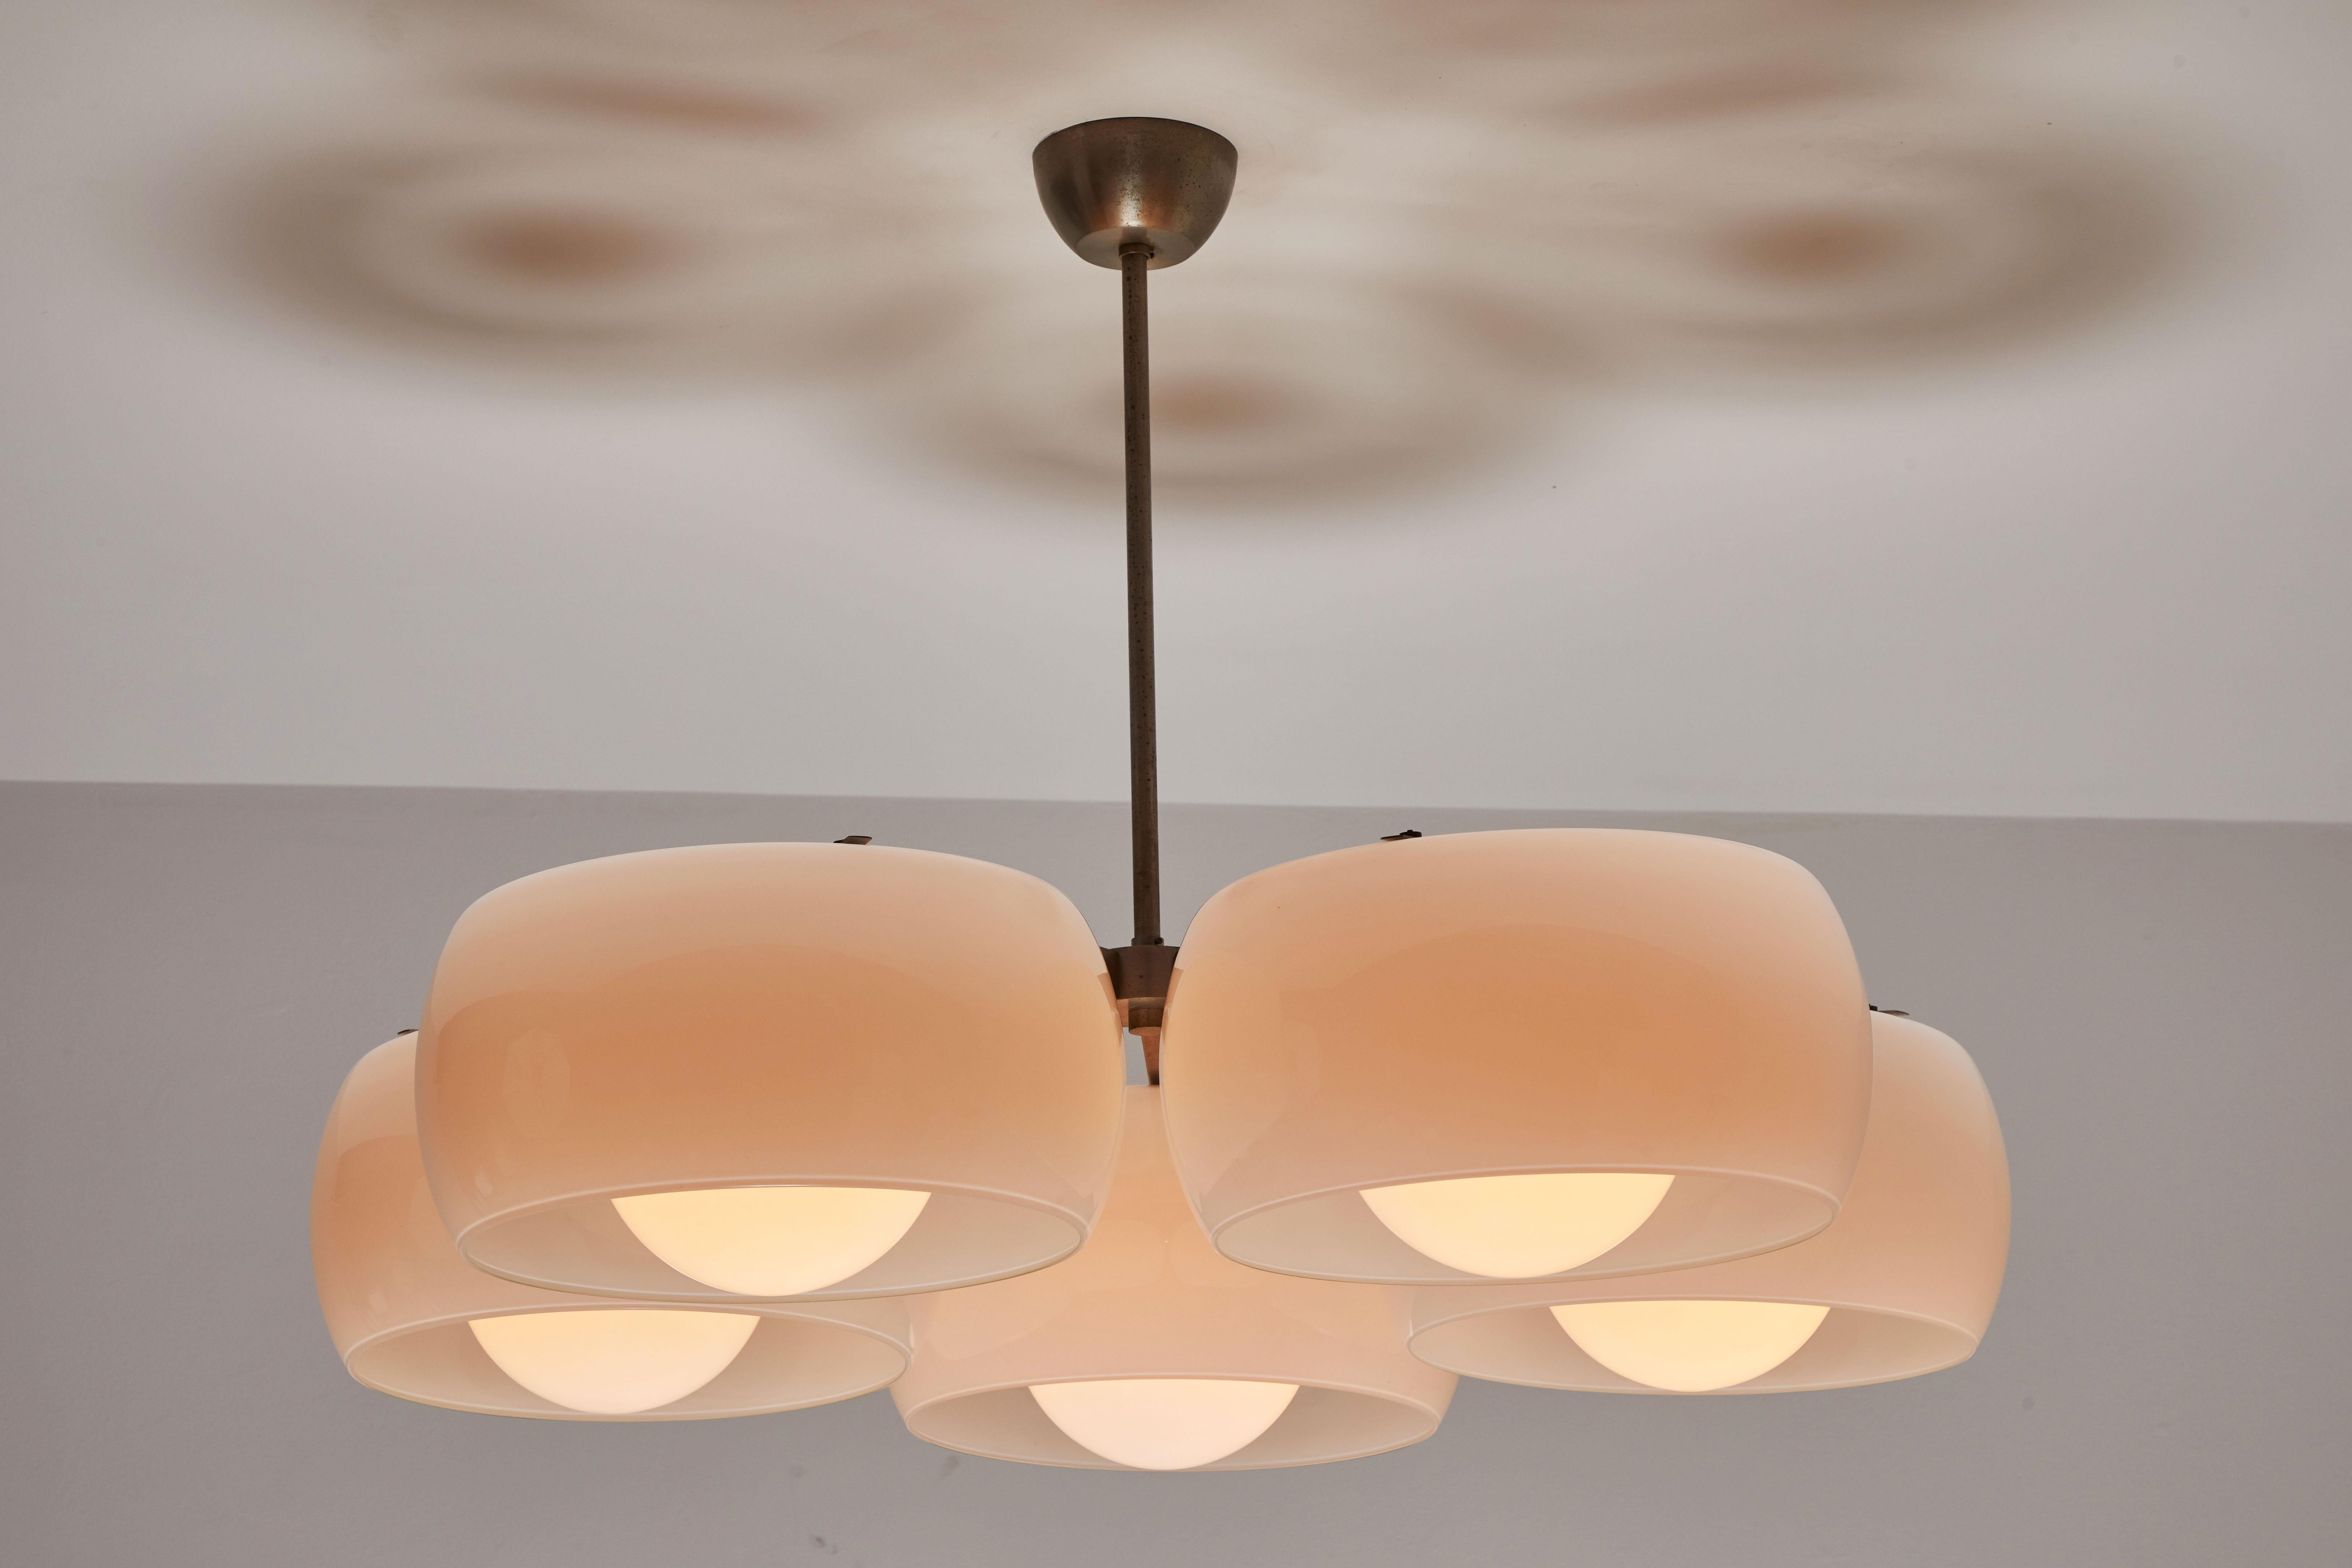 Large Five Globe Clinio Chandelier by Vico Magistretti for Artemide. Designed and manufactured in Italy circa 1960's. Brushed nickel plated brass hardware and canopy. Opaline glass diffusers. Rewired for US junction boxes. Each globe takes one E27